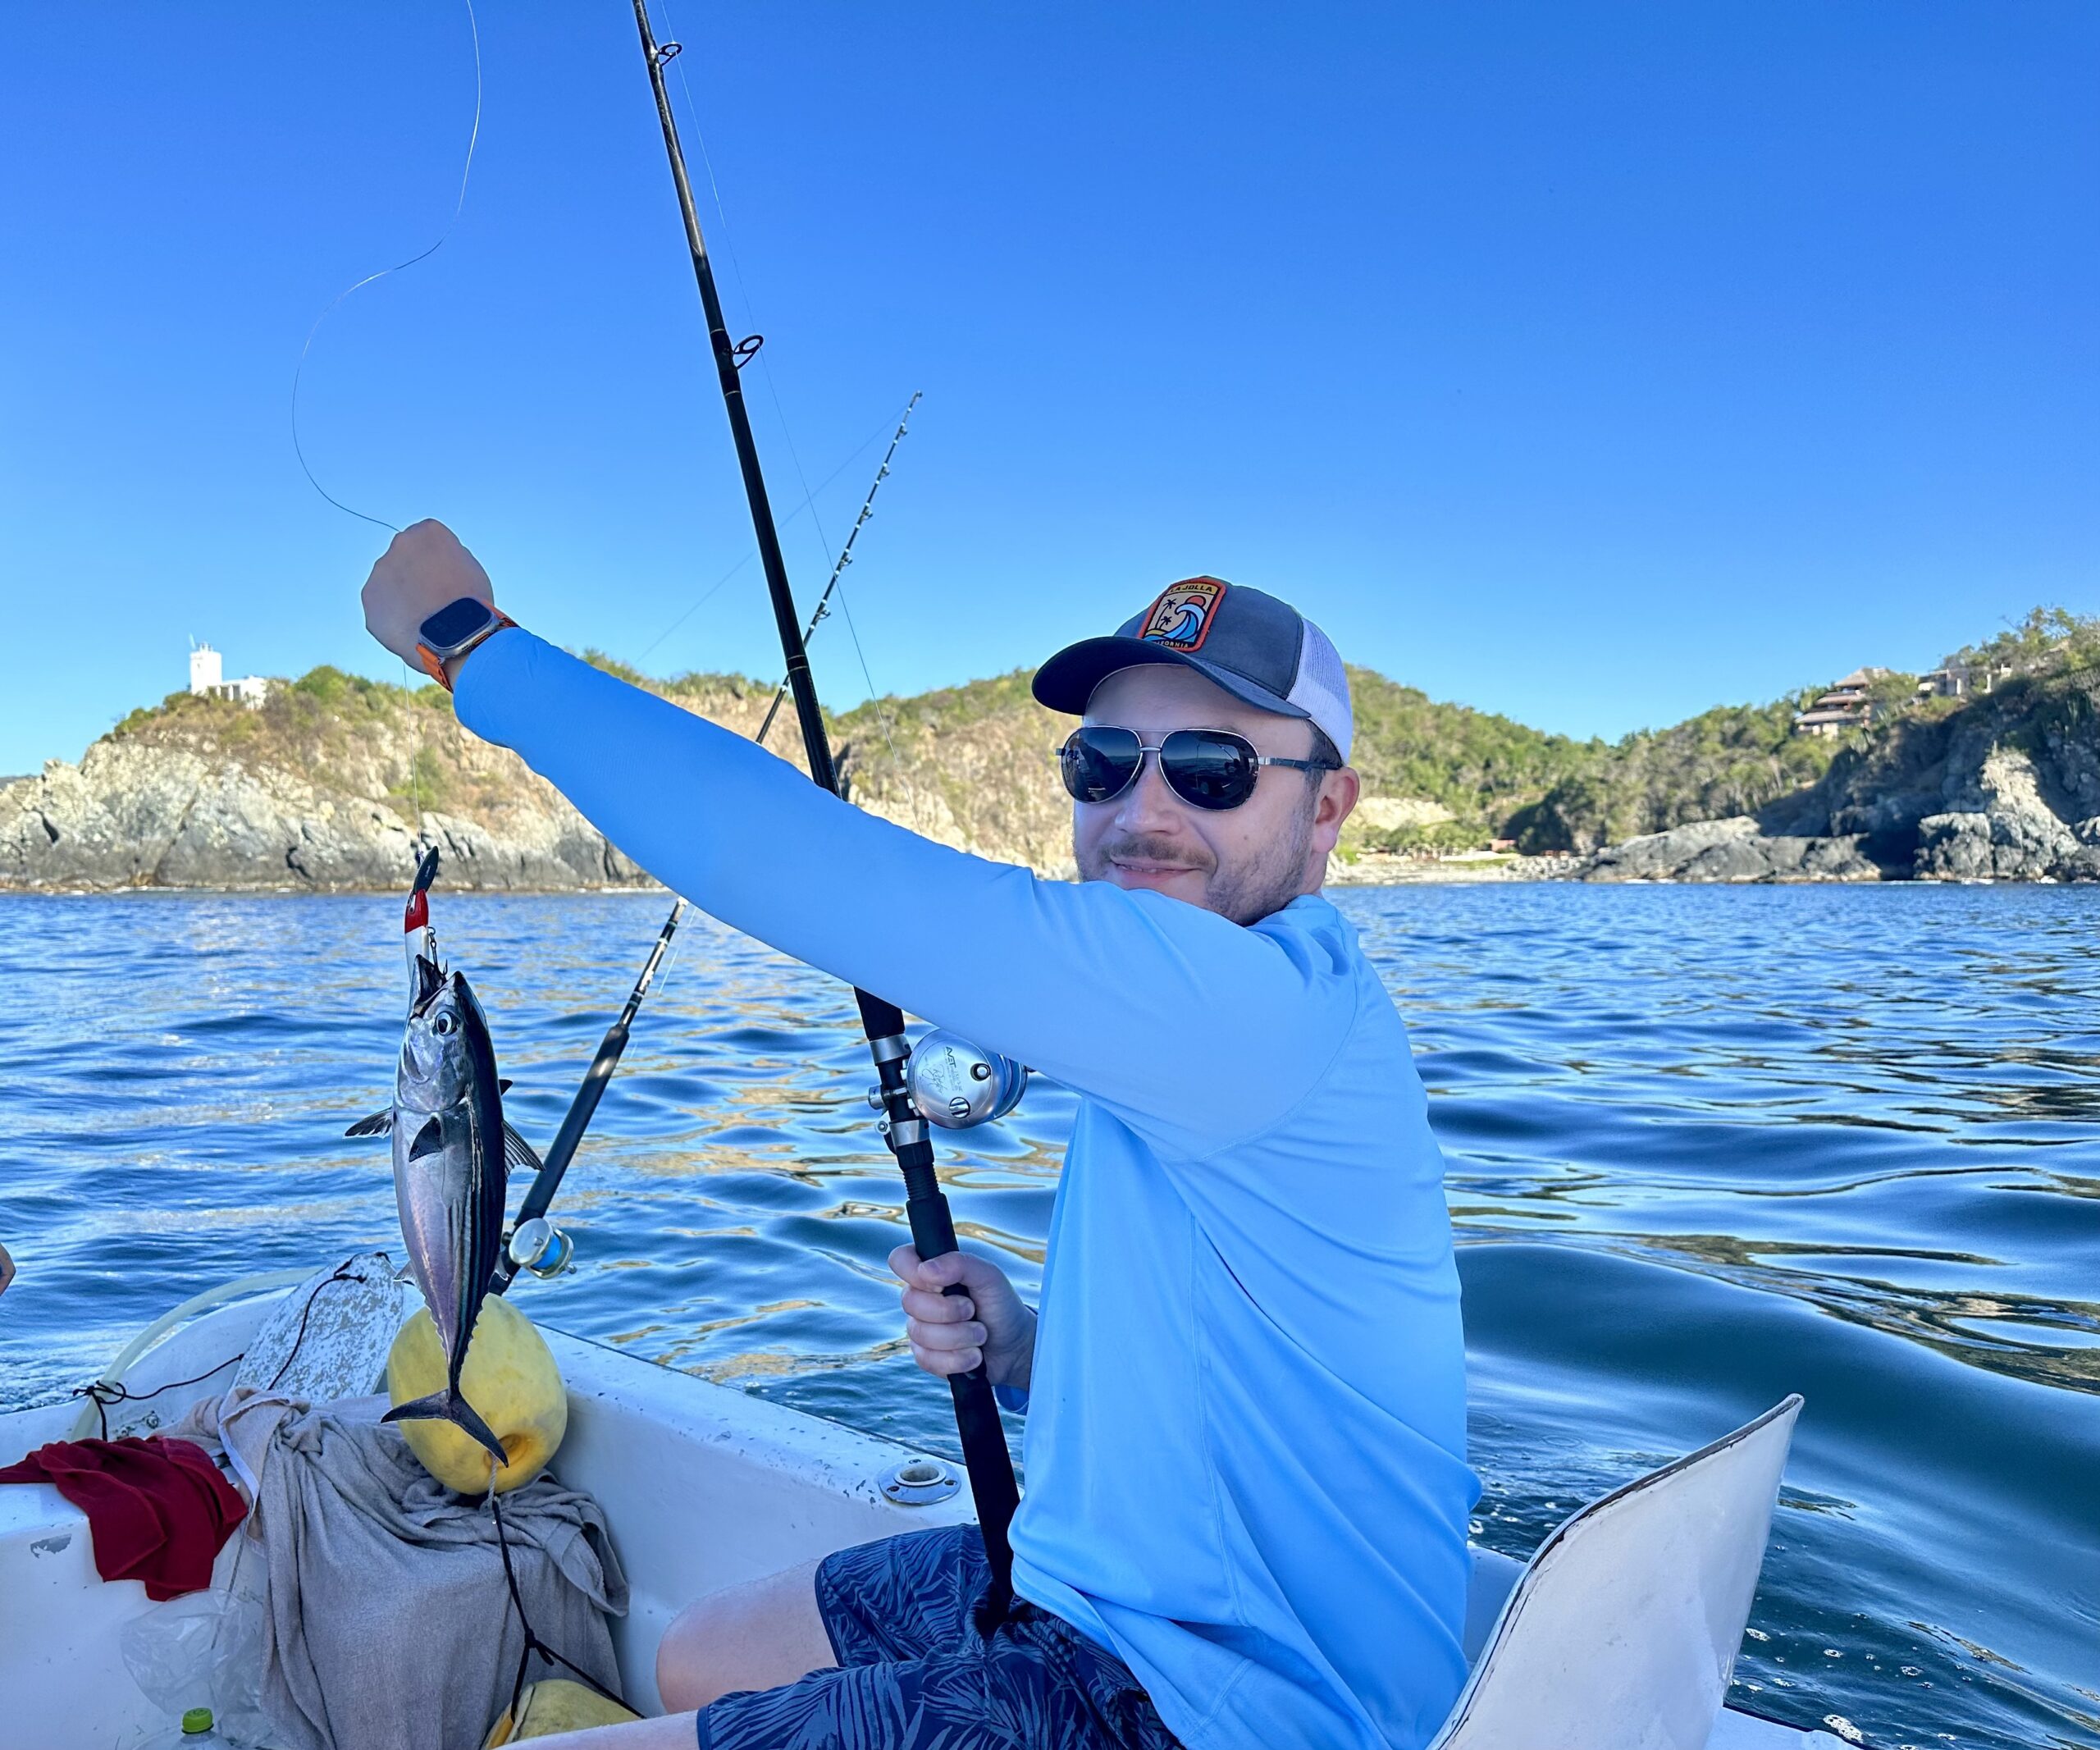 Fishing in Zihuatanejo, Mexico